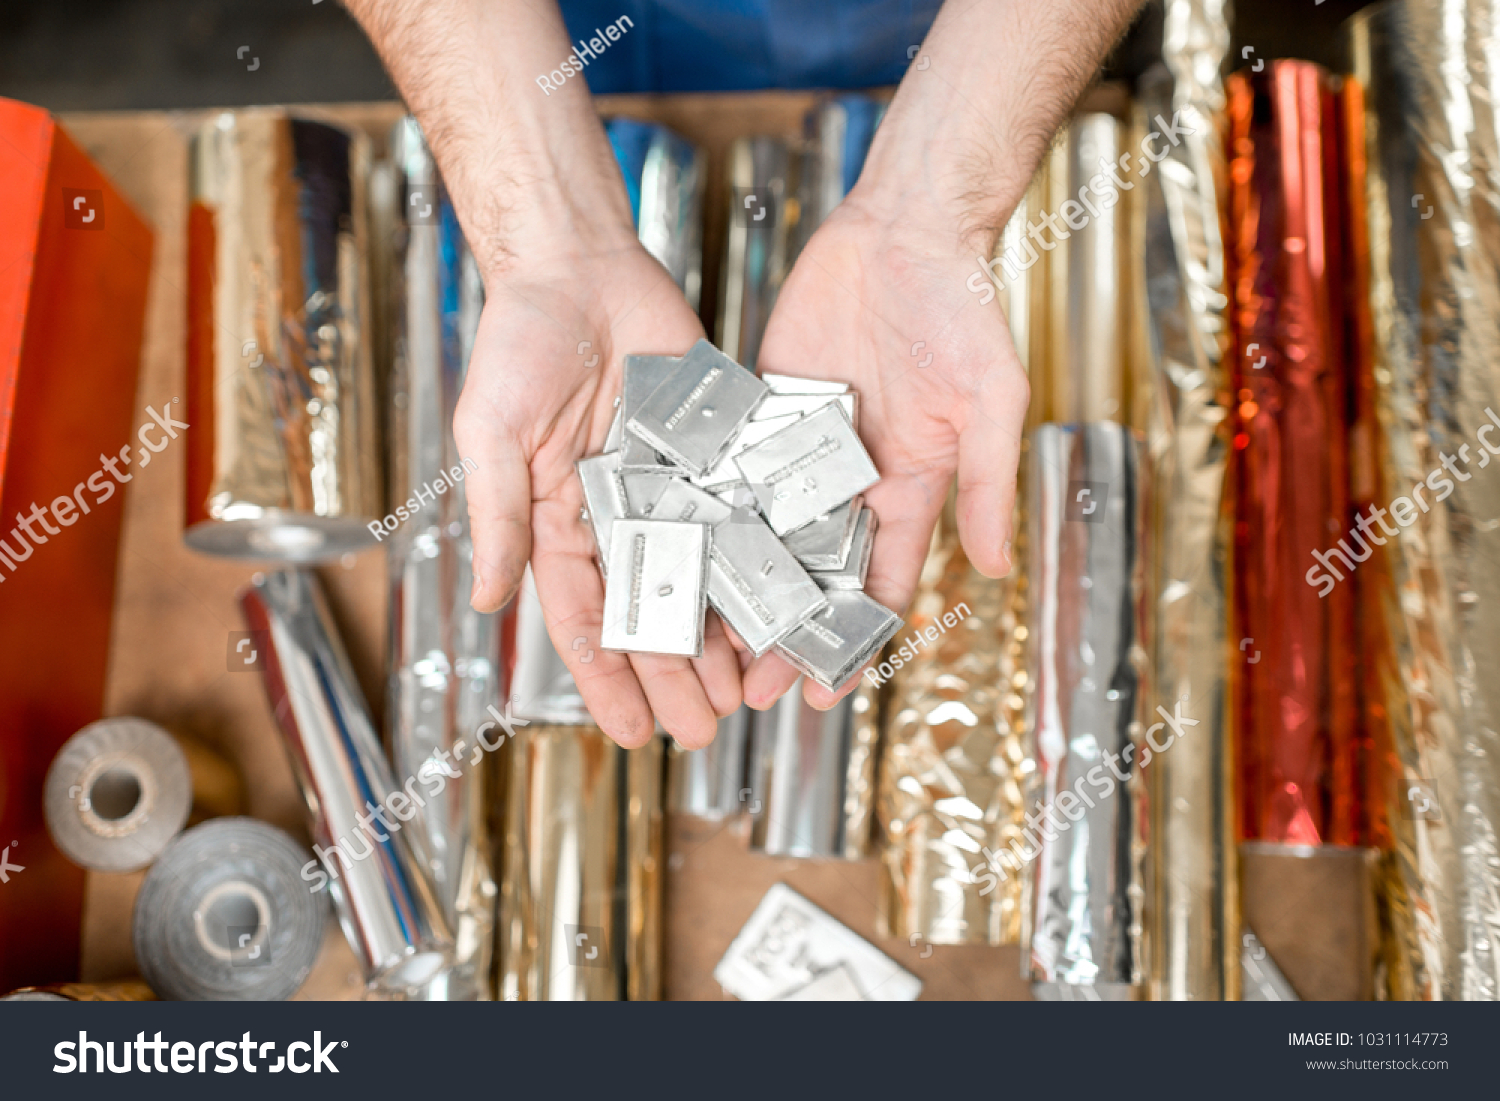 Holding a pile of small metal cliche for stamping with foil at the printing manufacturing #1031114773